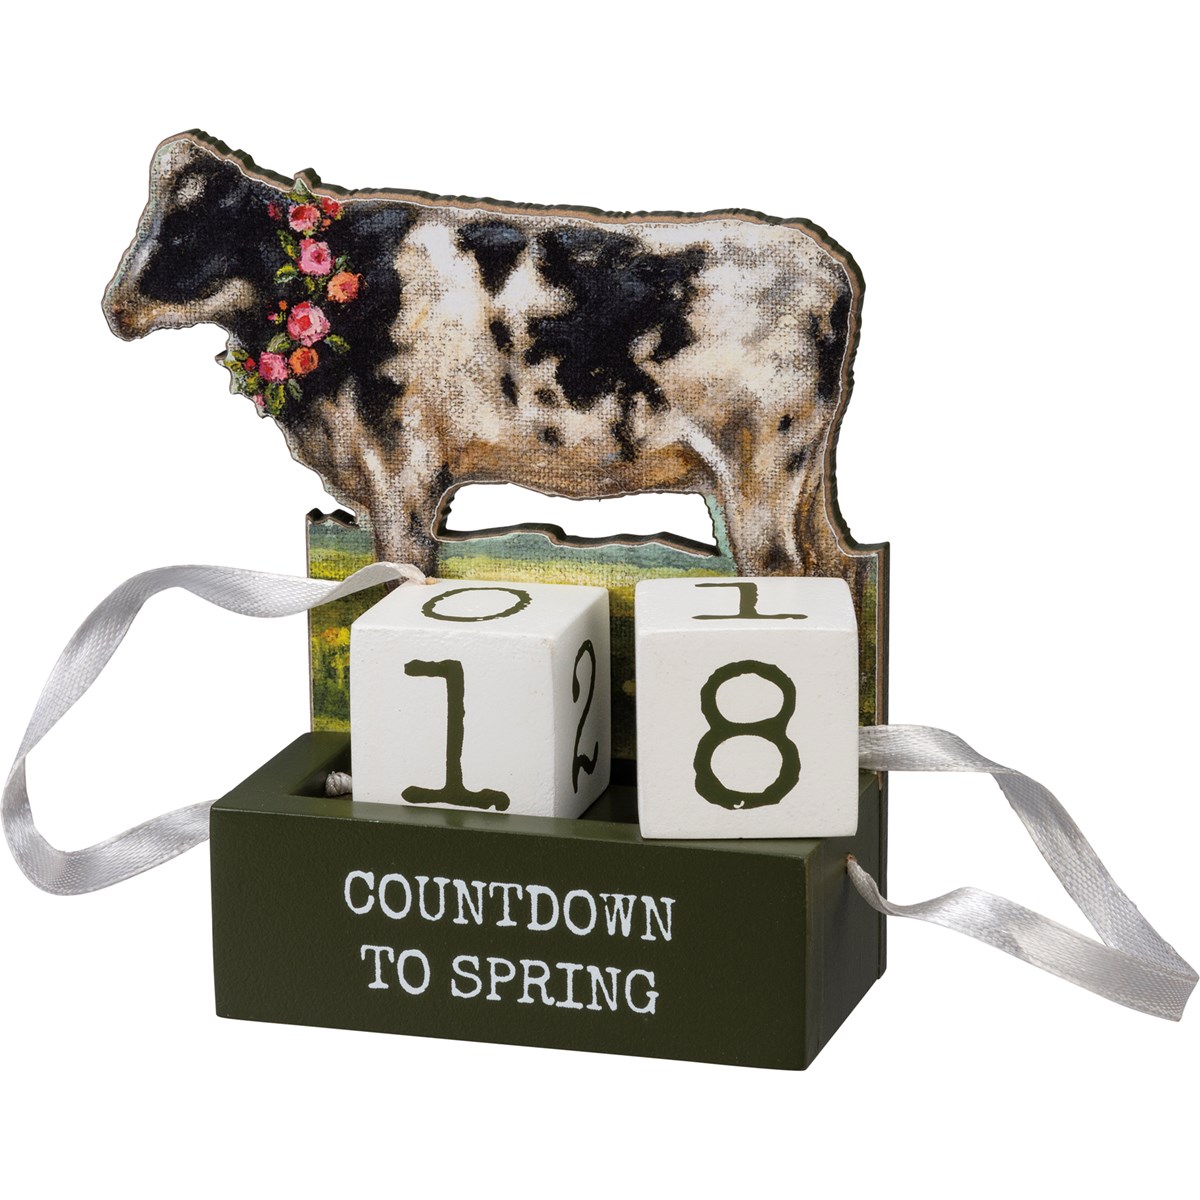 Block Countdown - Cow - Countdown To Spring - 4.75" x 4.75" x 2.50" - Wood, Paper, Ribbon